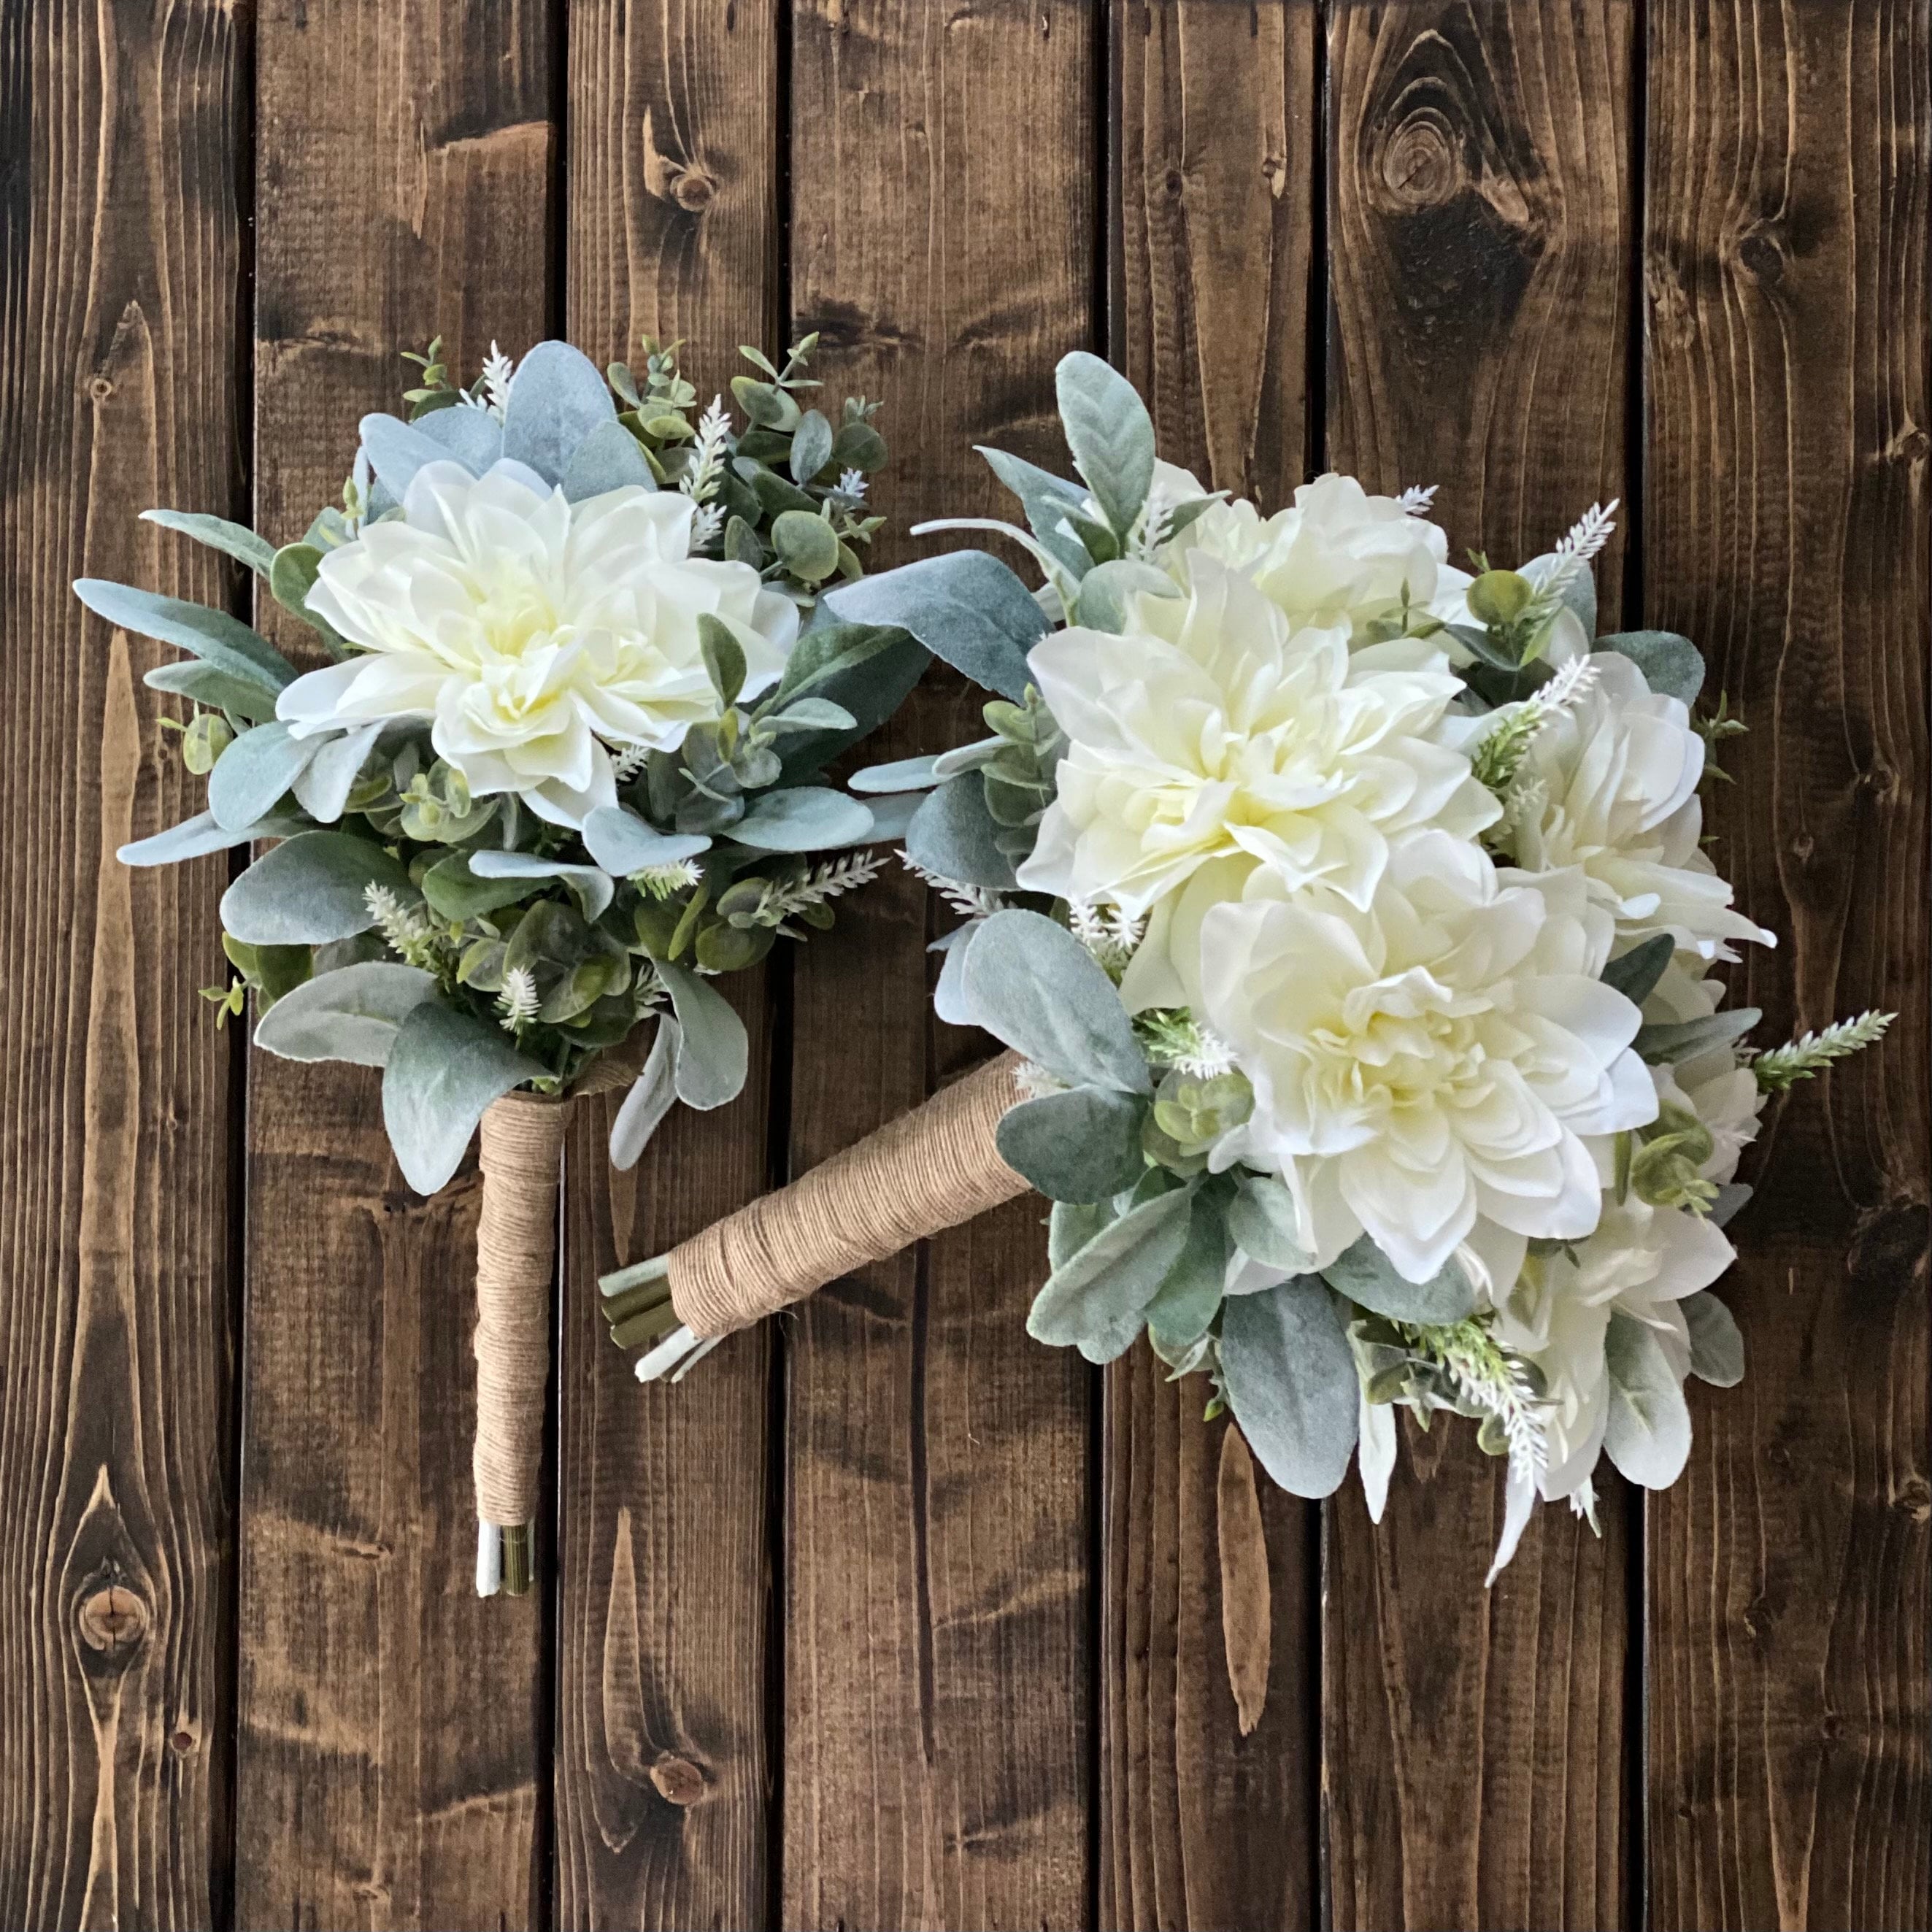 SEMONONIA Bridesmaid Bouquets - Set of 6 Ivory Artificial Flowers Bouquet  for Wedding Small Floral Centerpieces for Marriage Proposal Party